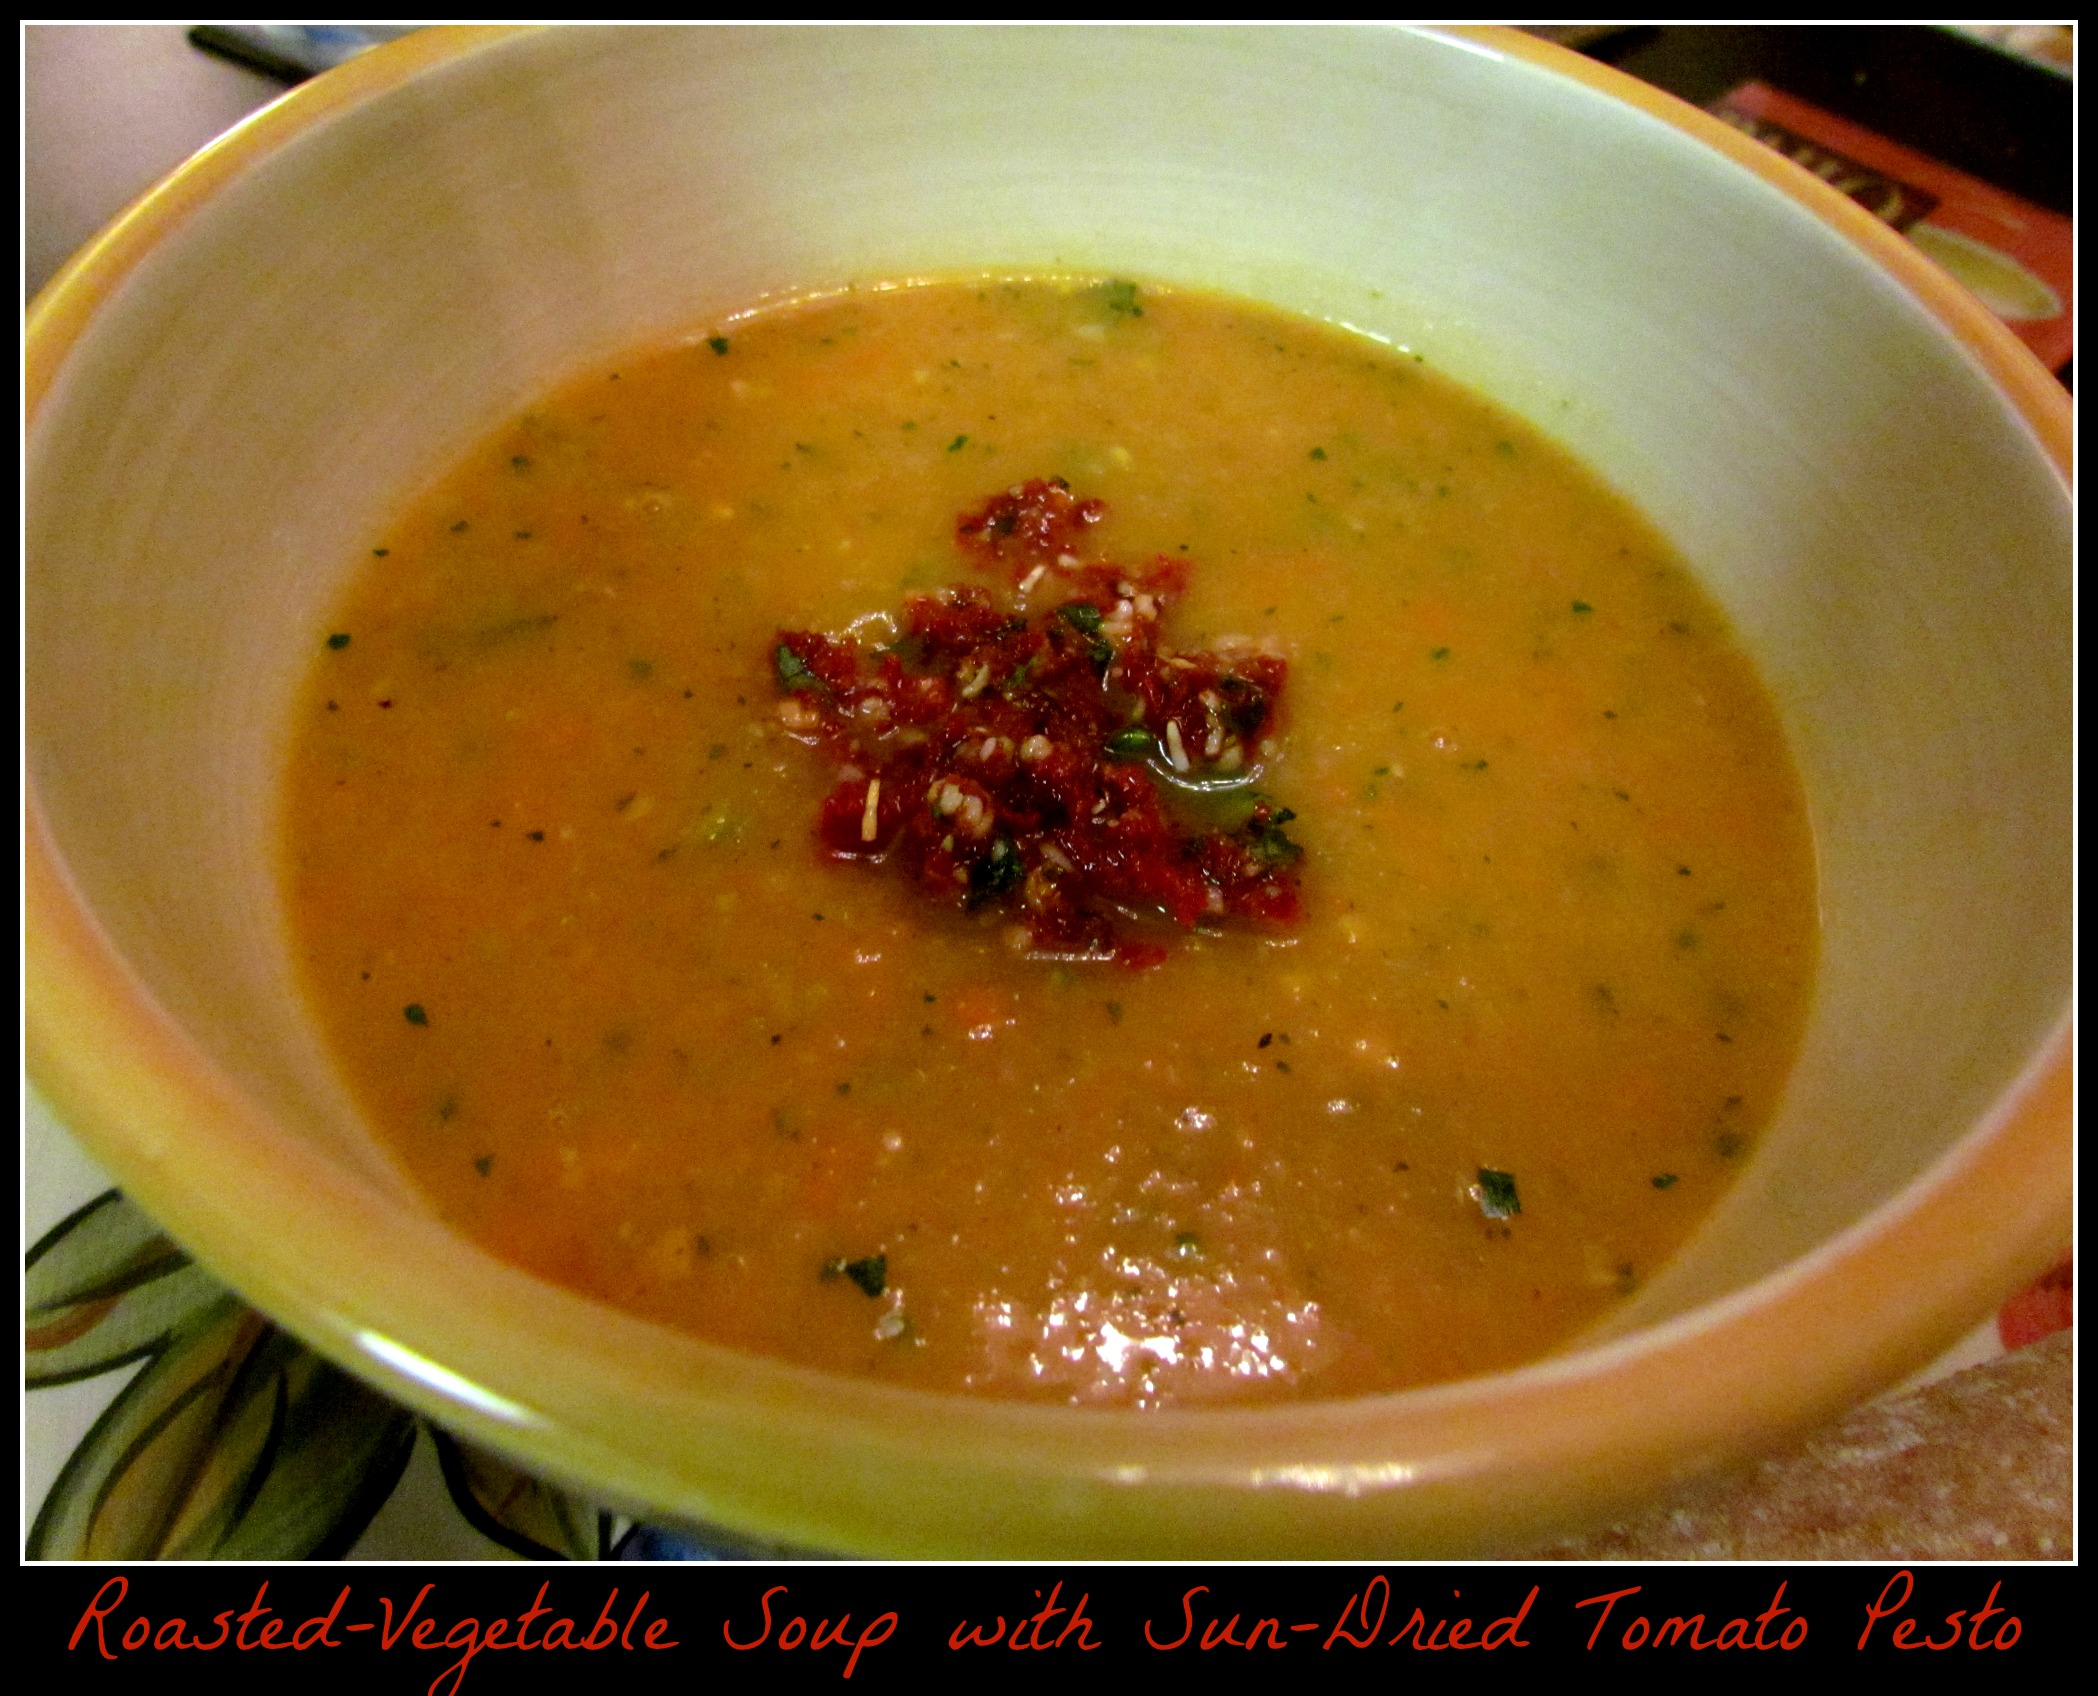 Roasted-Vegetable Soup with Sun-Dried Tomato Pesto